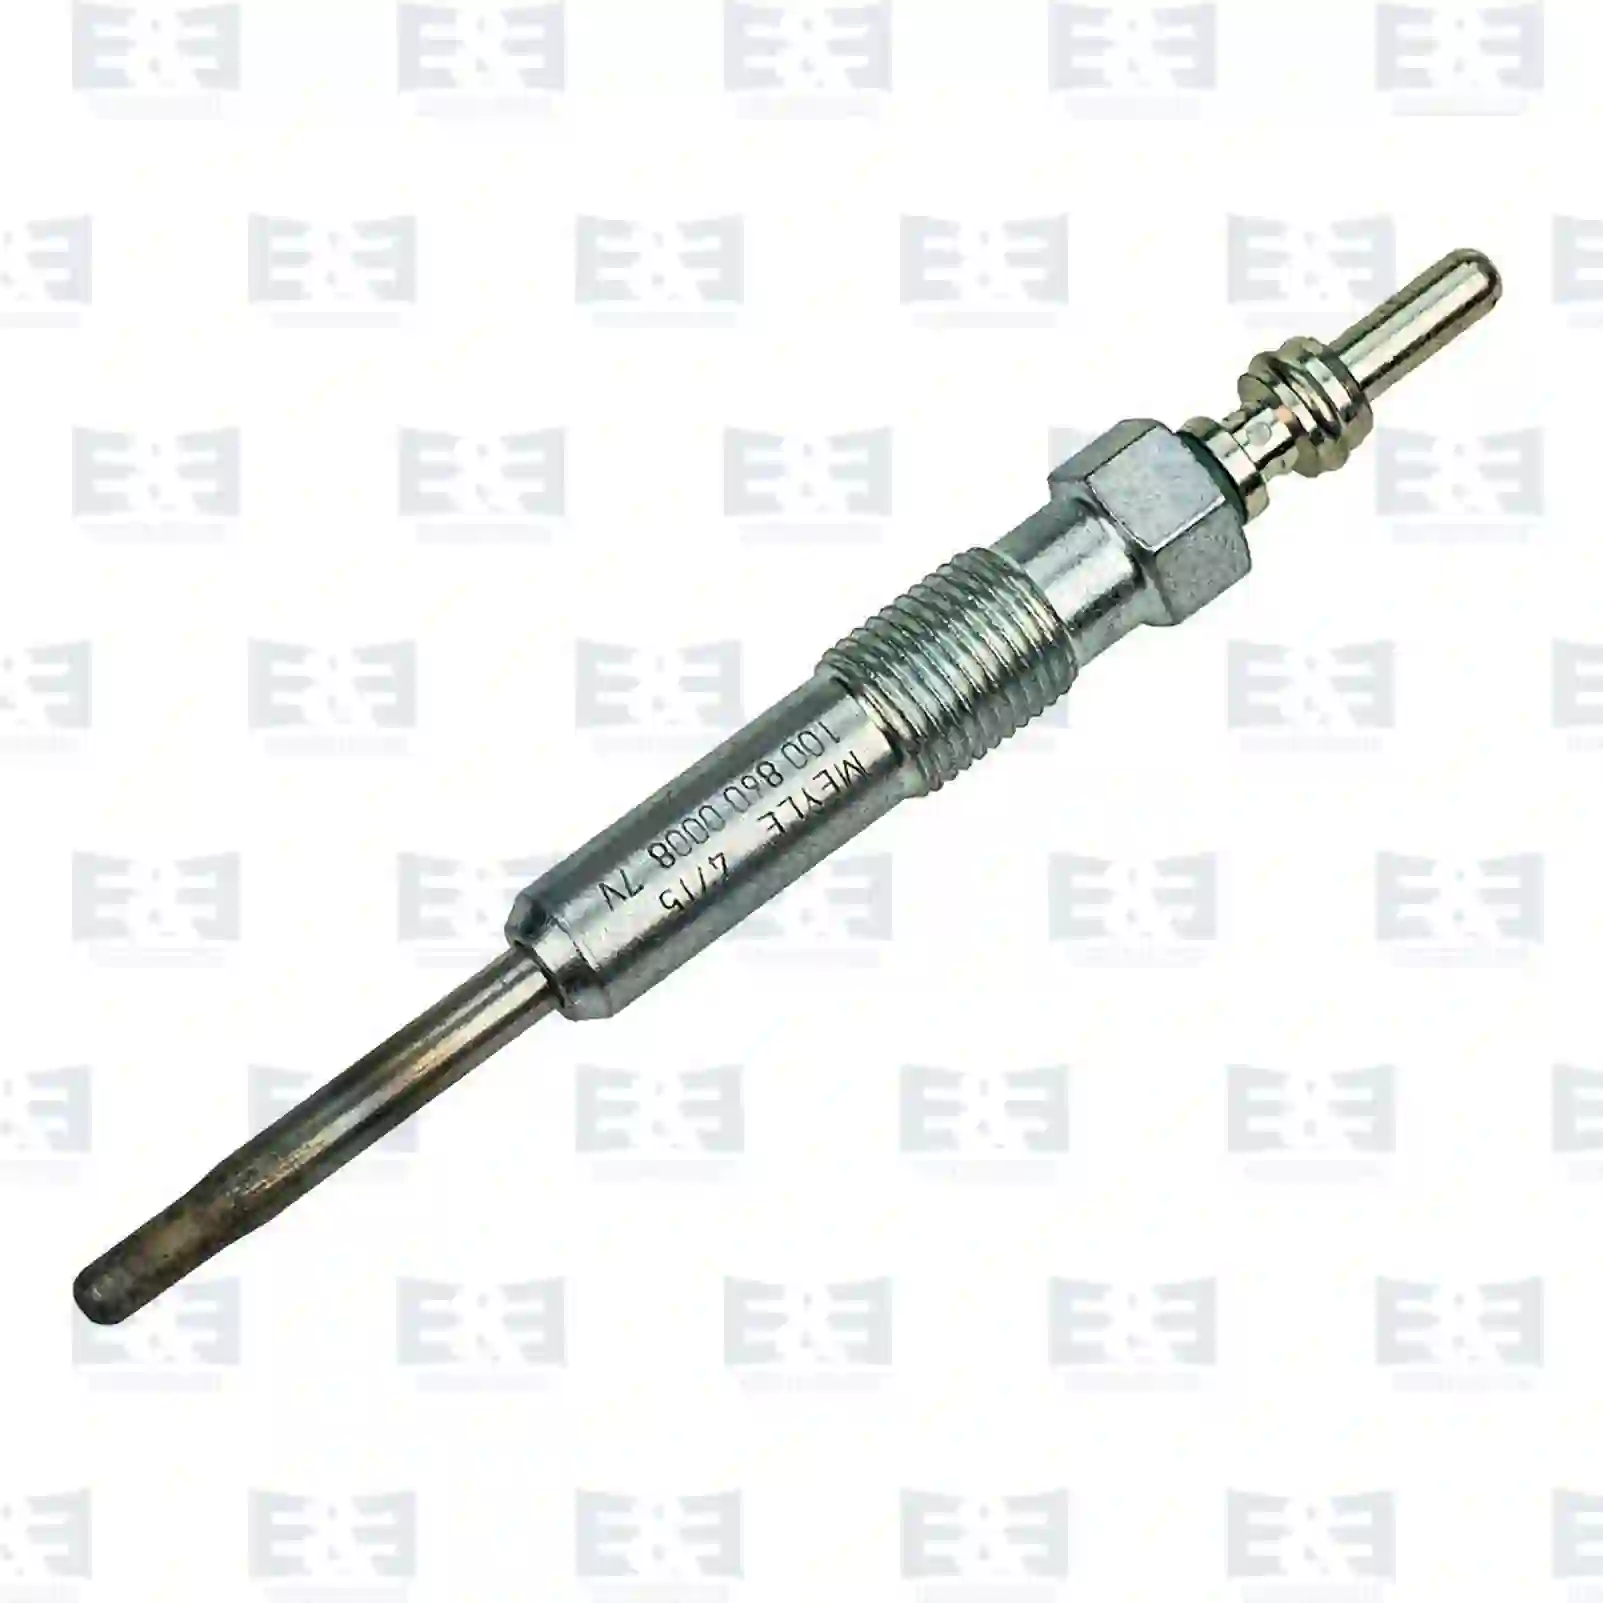 Glow plug, 2E2208790, N10591604, N10591608, 68000913AA, 68000913AA, N10591604, N10591608, N10591604, N10591608, N10591604, N10591608, N10591601, N10591604, N10591607, N10591608 ||  2E2208790 E&E Truck Spare Parts | Truck Spare Parts, Auotomotive Spare Parts Glow plug, 2E2208790, N10591604, N10591608, 68000913AA, 68000913AA, N10591604, N10591608, N10591604, N10591608, N10591604, N10591608, N10591601, N10591604, N10591607, N10591608 ||  2E2208790 E&E Truck Spare Parts | Truck Spare Parts, Auotomotive Spare Parts